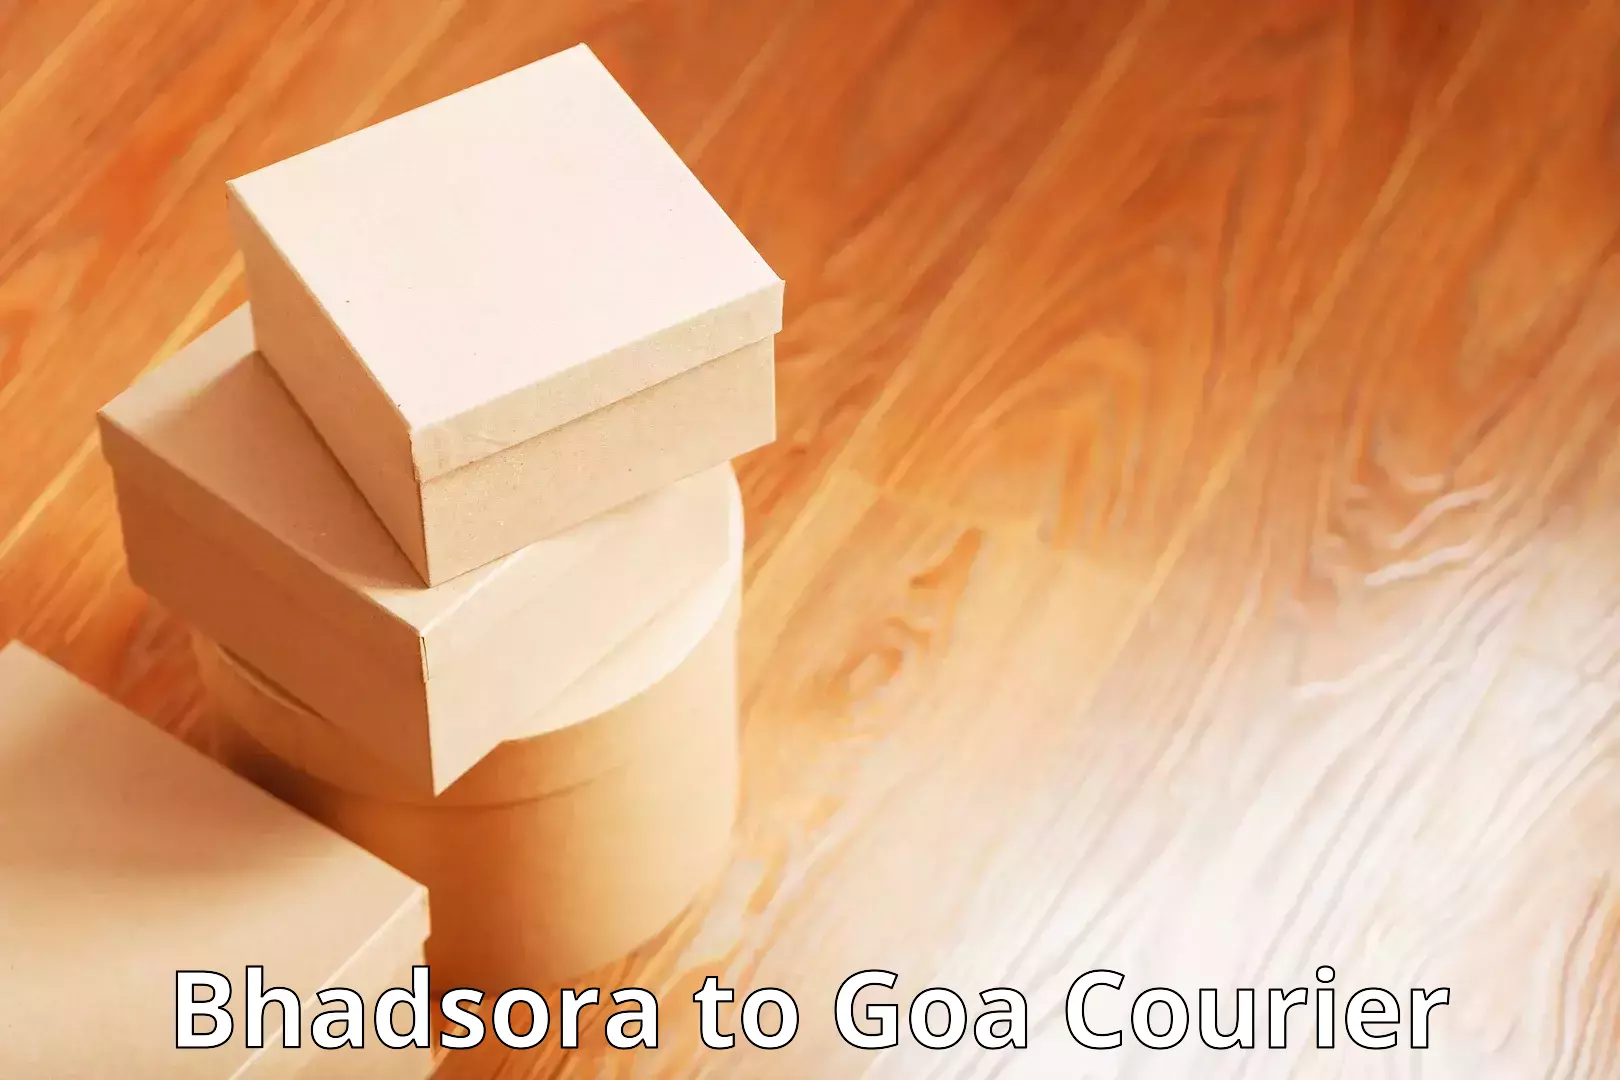 End-to-end delivery Bhadsora to Goa